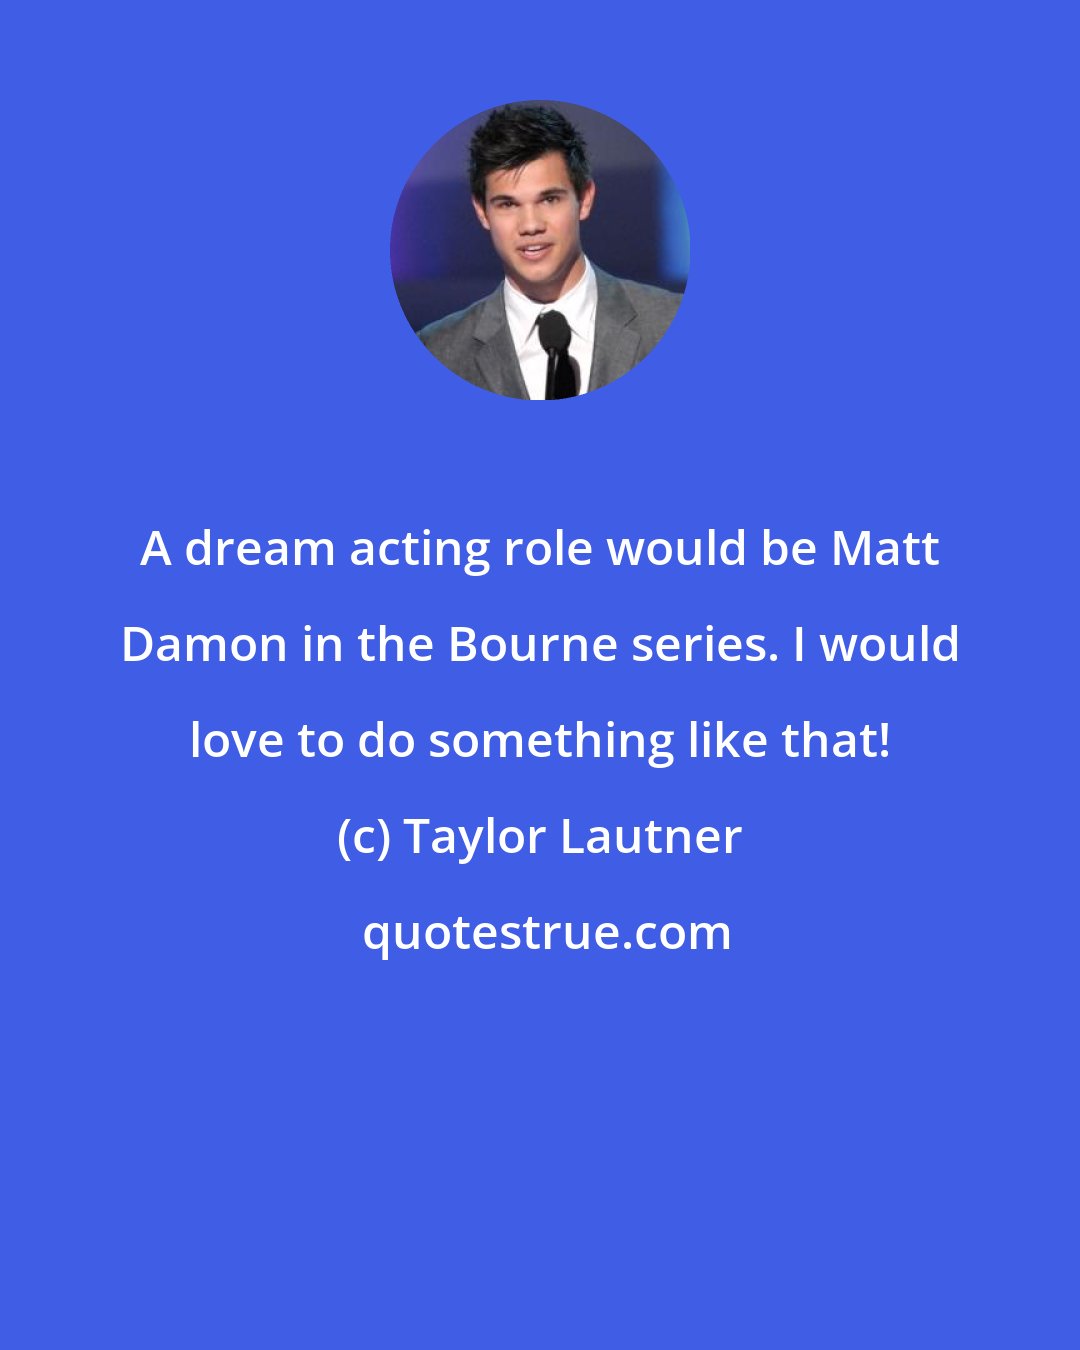 Taylor Lautner: A dream acting role would be Matt Damon in the Bourne series. I would love to do something like that!